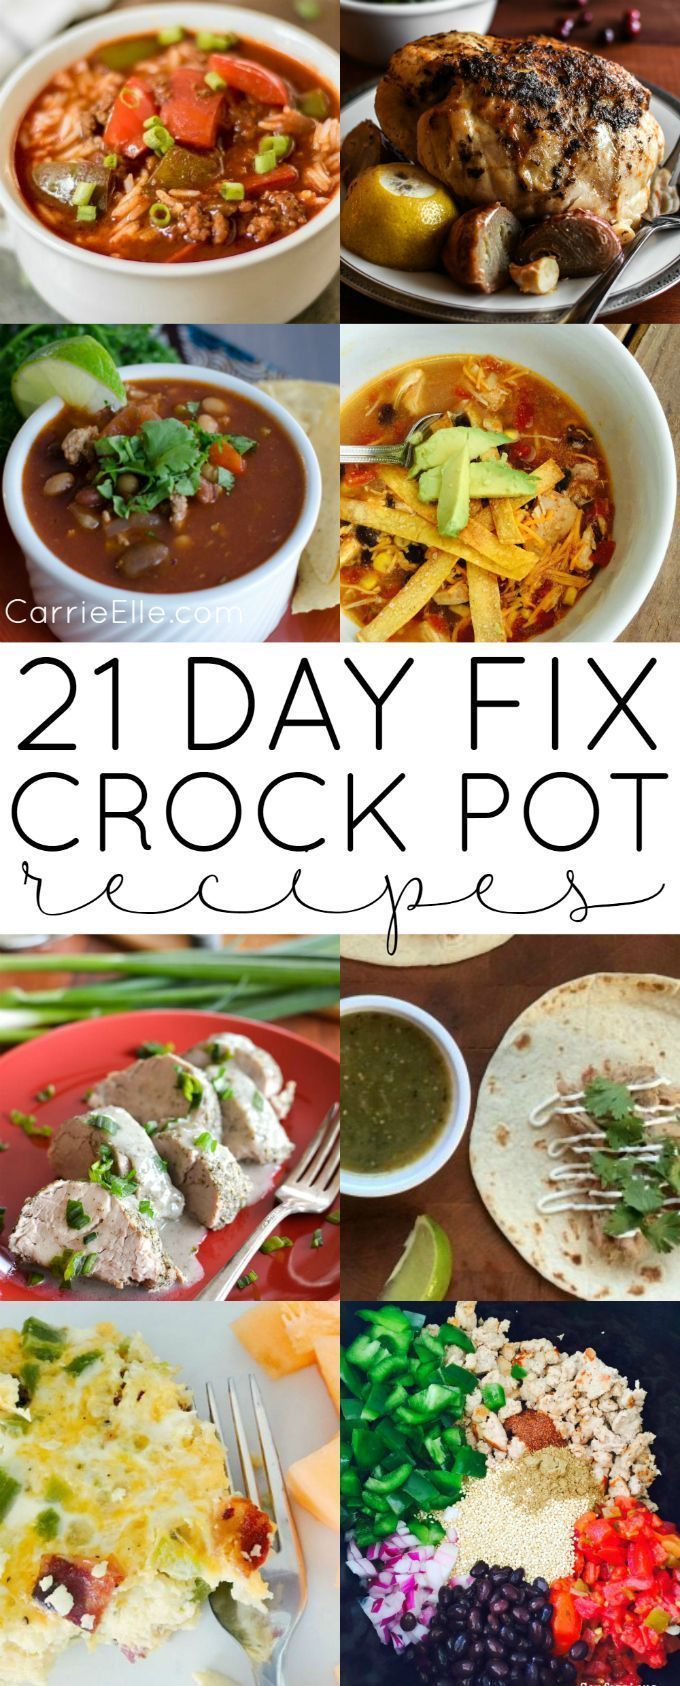 21 Day Fix Crock Pot Recipes (with container counts for every recipe…and this post only includes recipes created for the 21 Day